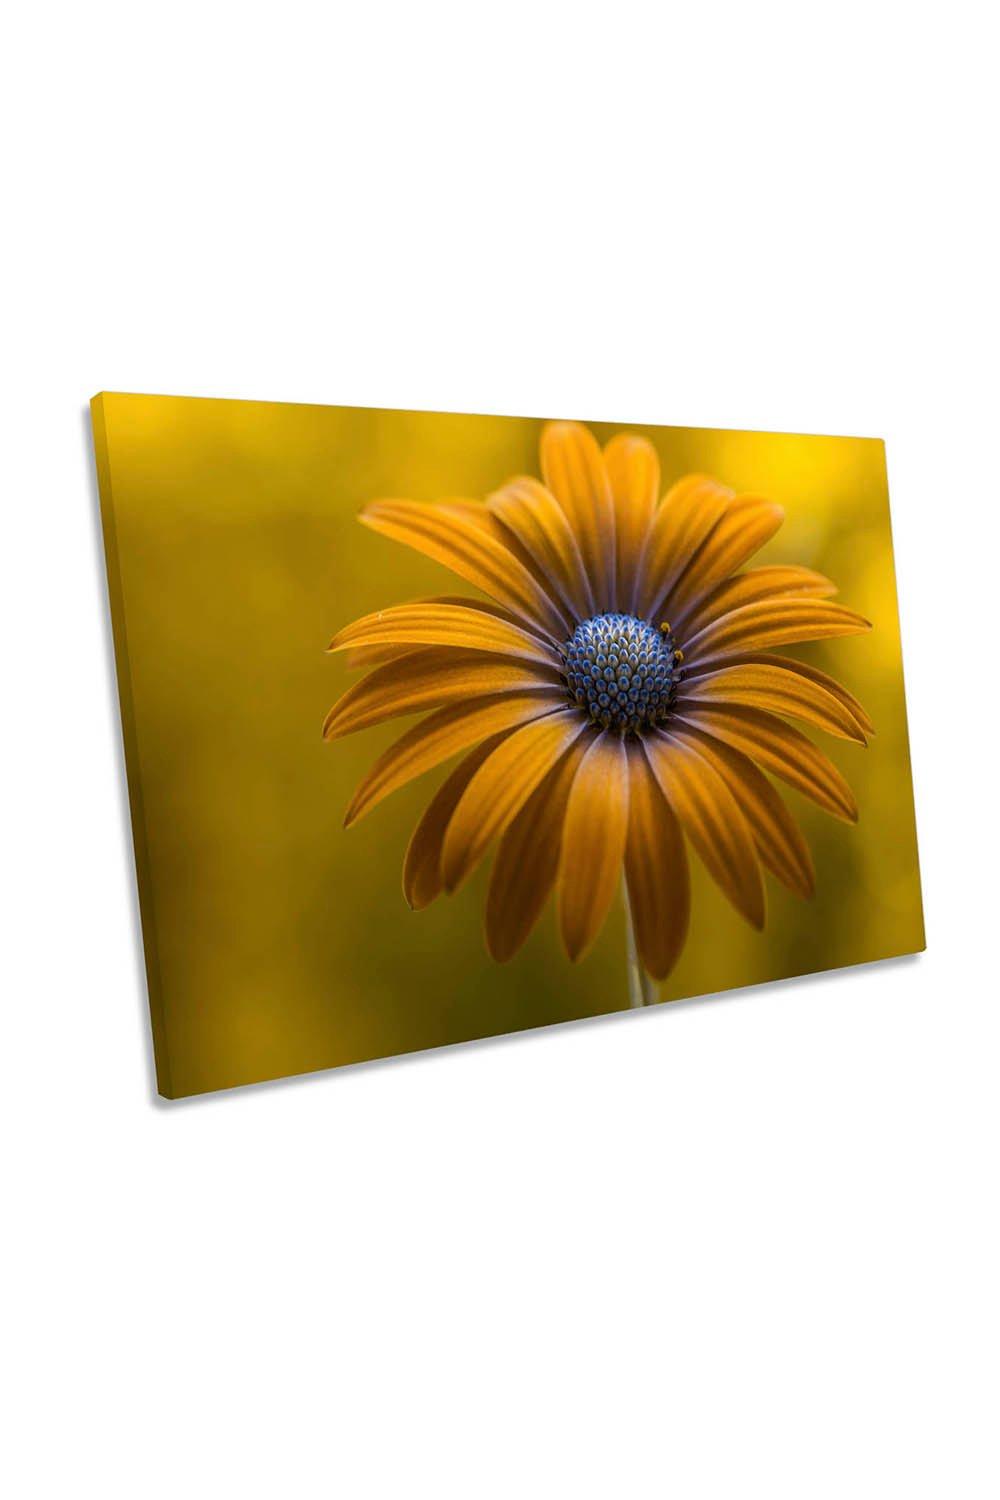 Sunshine Daisy Flower Yellow Floral Canvas Wall Art Picture Print